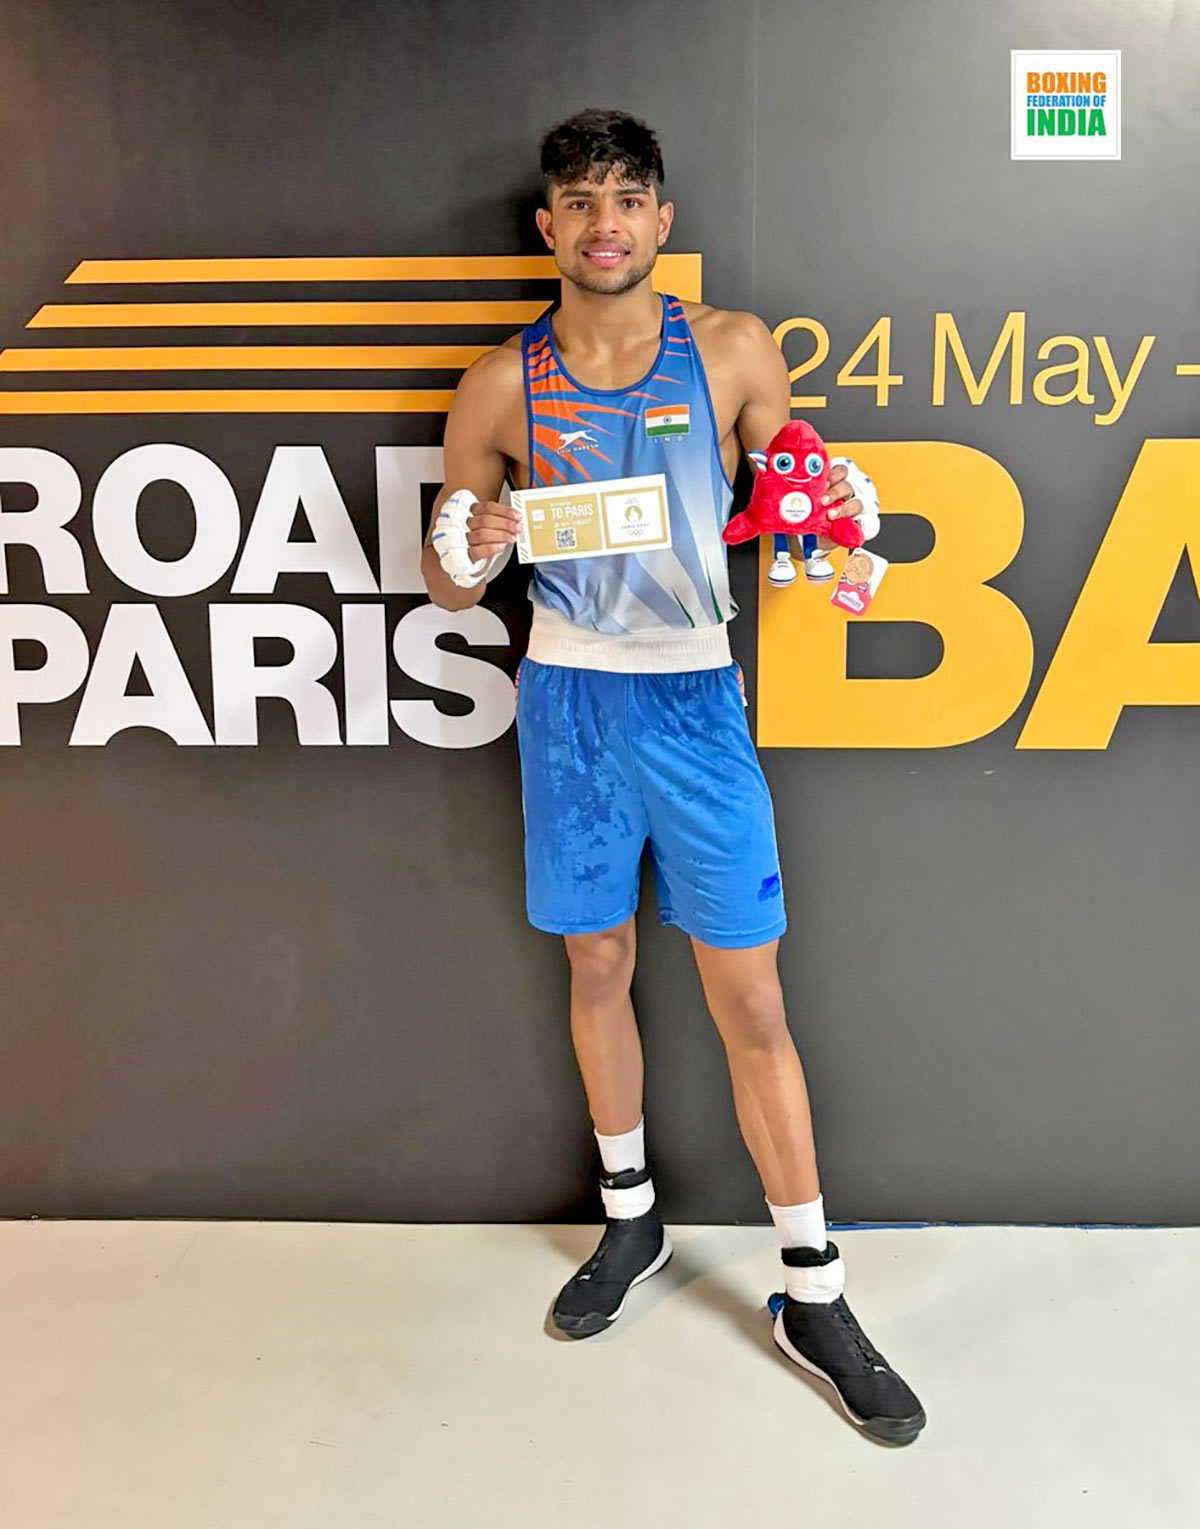 Nishant Dev is the first Indian male boxer to book a berth for the Paris Games